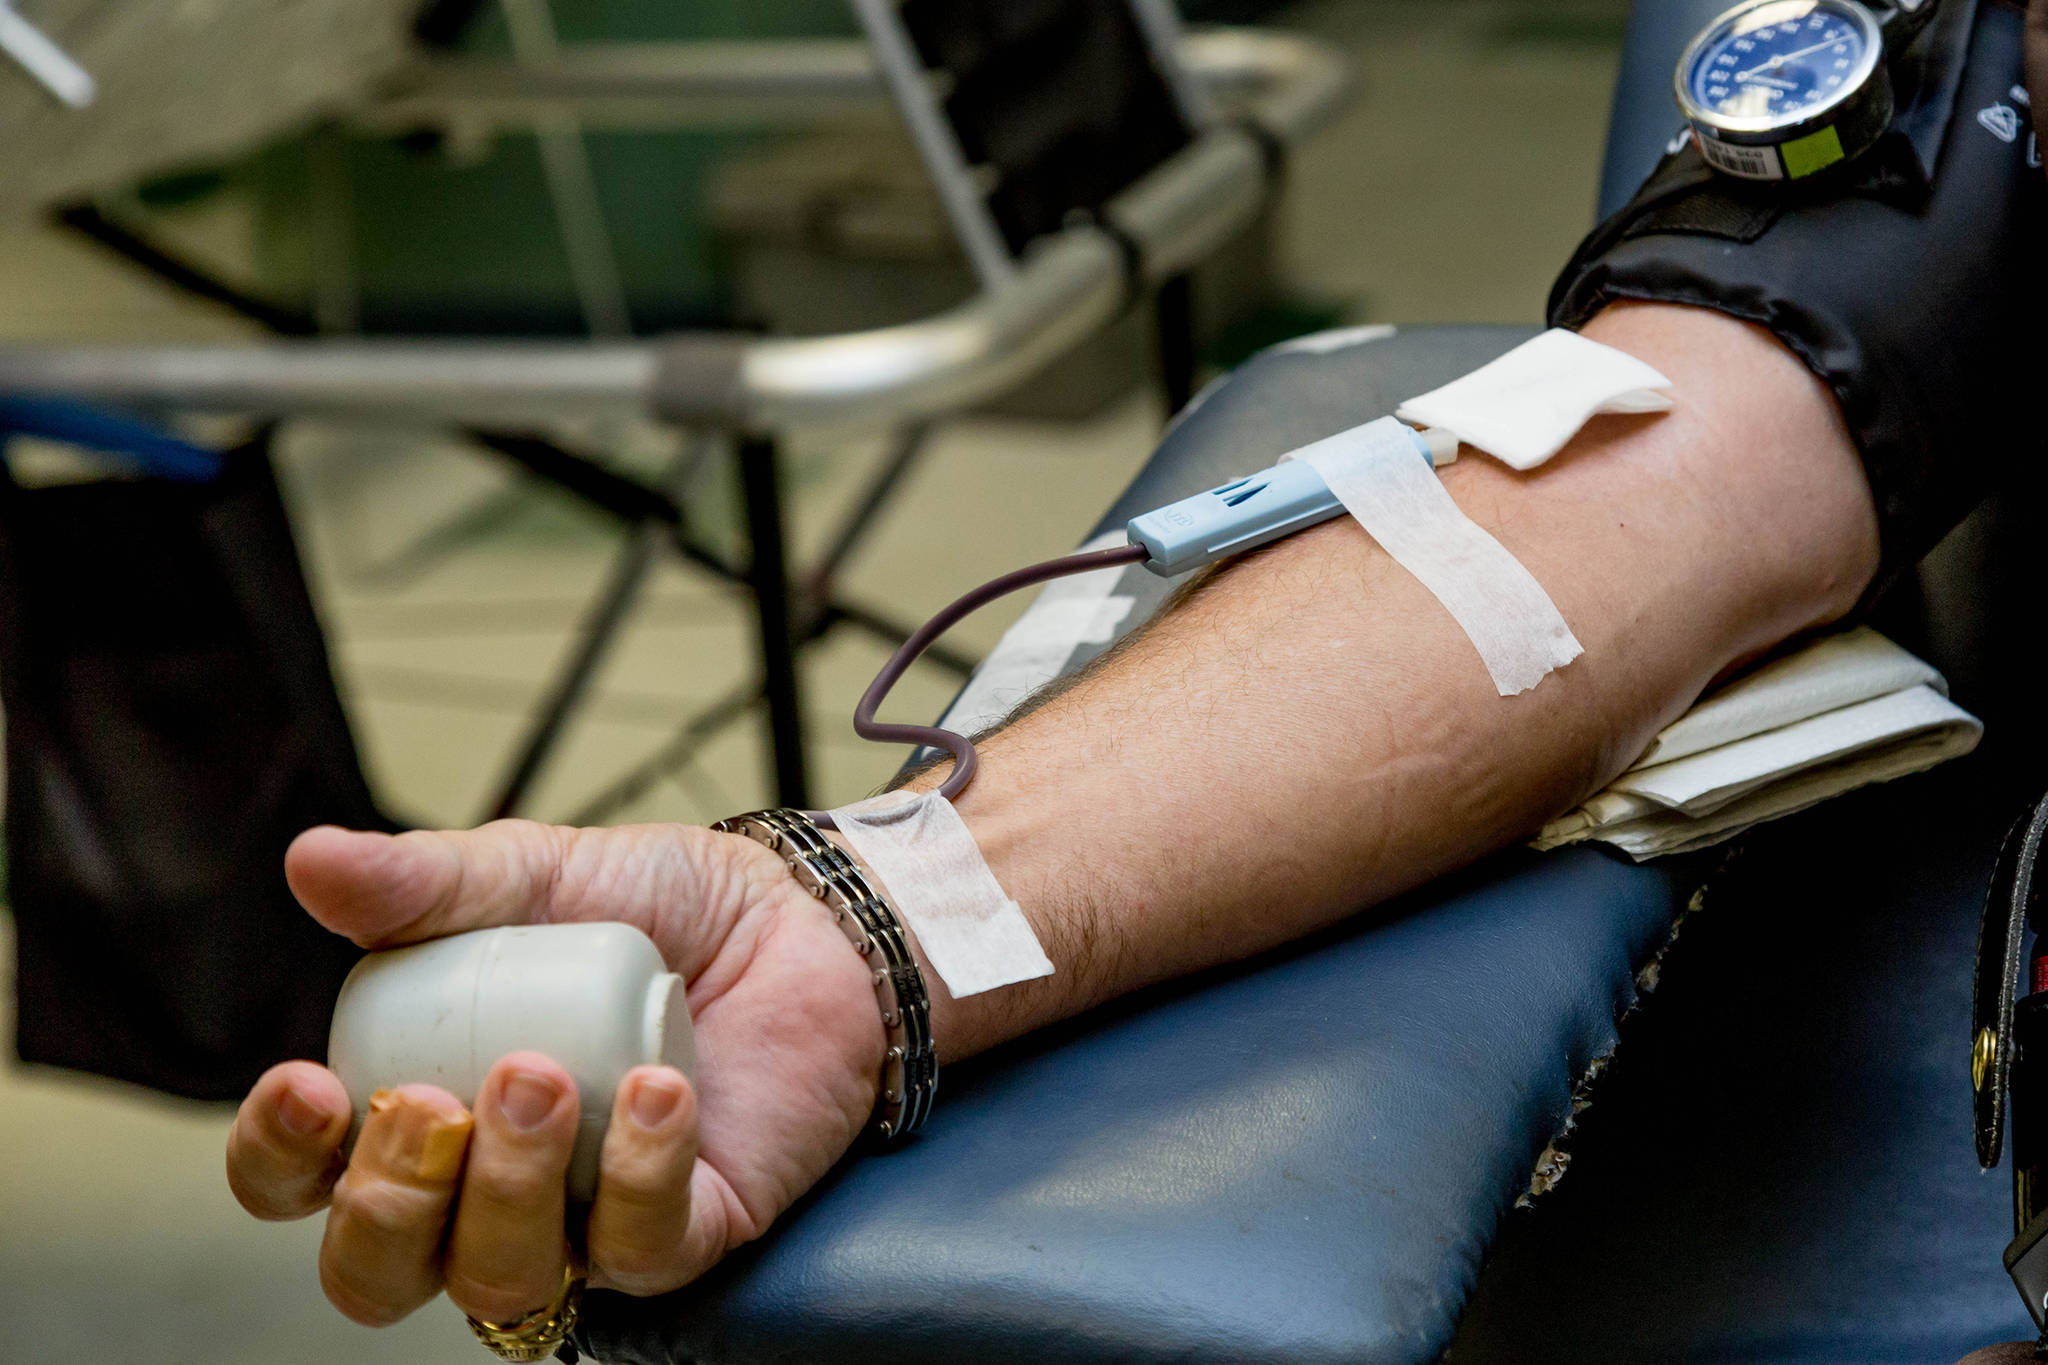 In this stock photo, a person’s blood is collected during blood donation. Next week, residents of Gustavus will have blood samples taken for a study that will determine what quantities of so-called “forever chemicals” are in their blood and how that may correlate to the chemicals present in drinking water. (Unsplash | LuAnn Hunt)